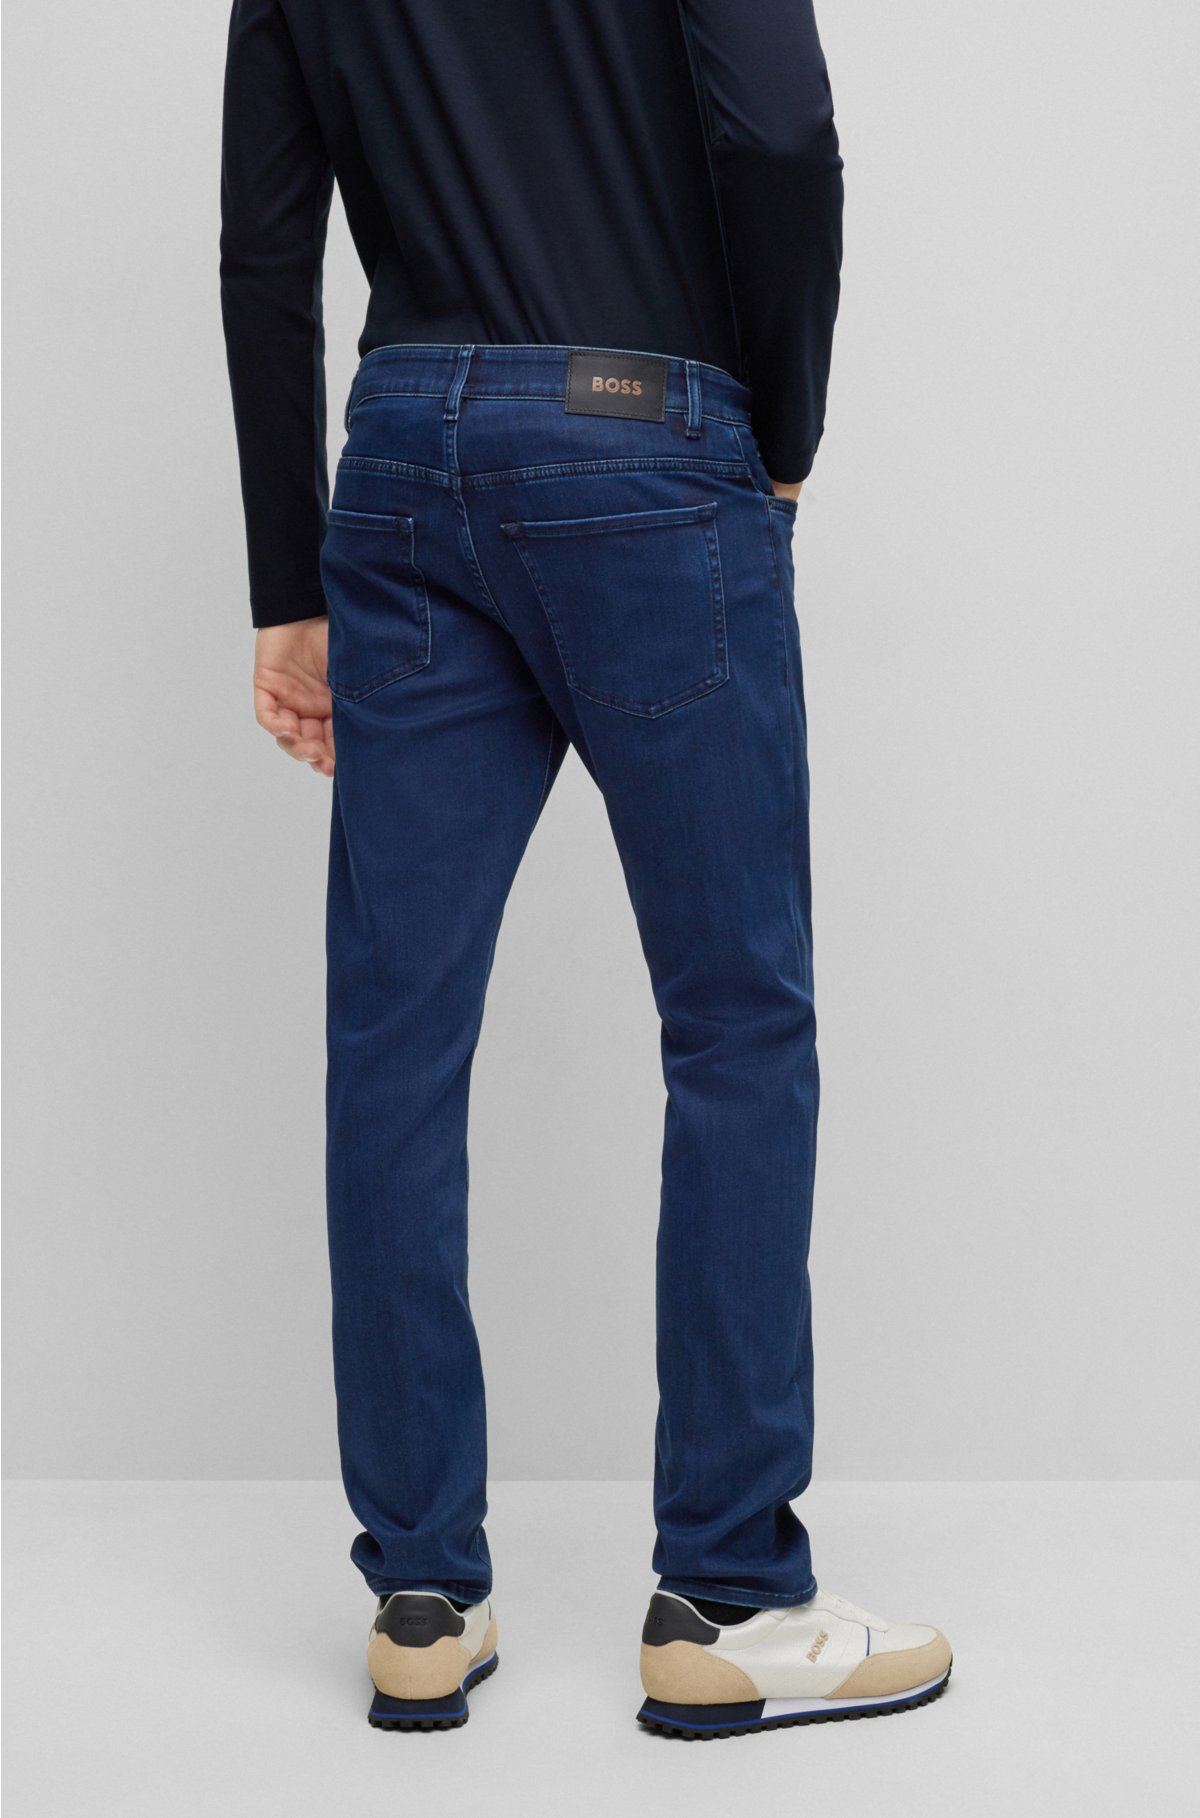 jeans in BOSS blue Slim-fit satin-touch - denim